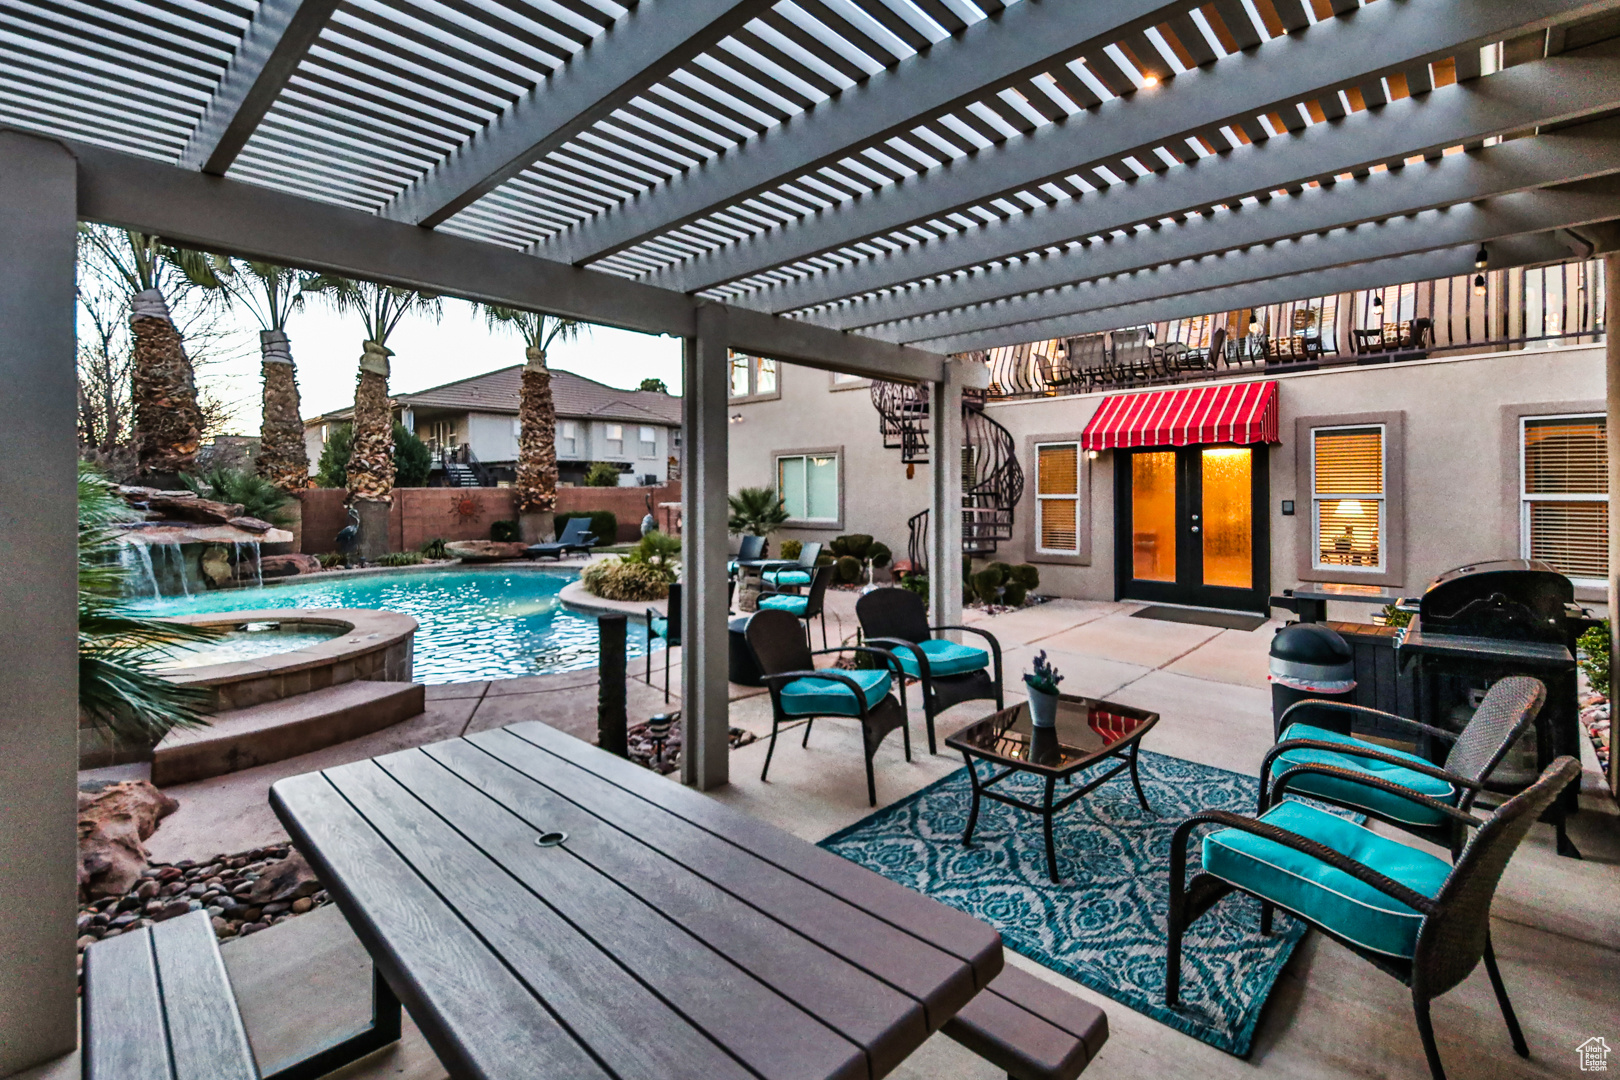 View of patio / terrace with a pool with hot tub, a pergola, and pool water feature